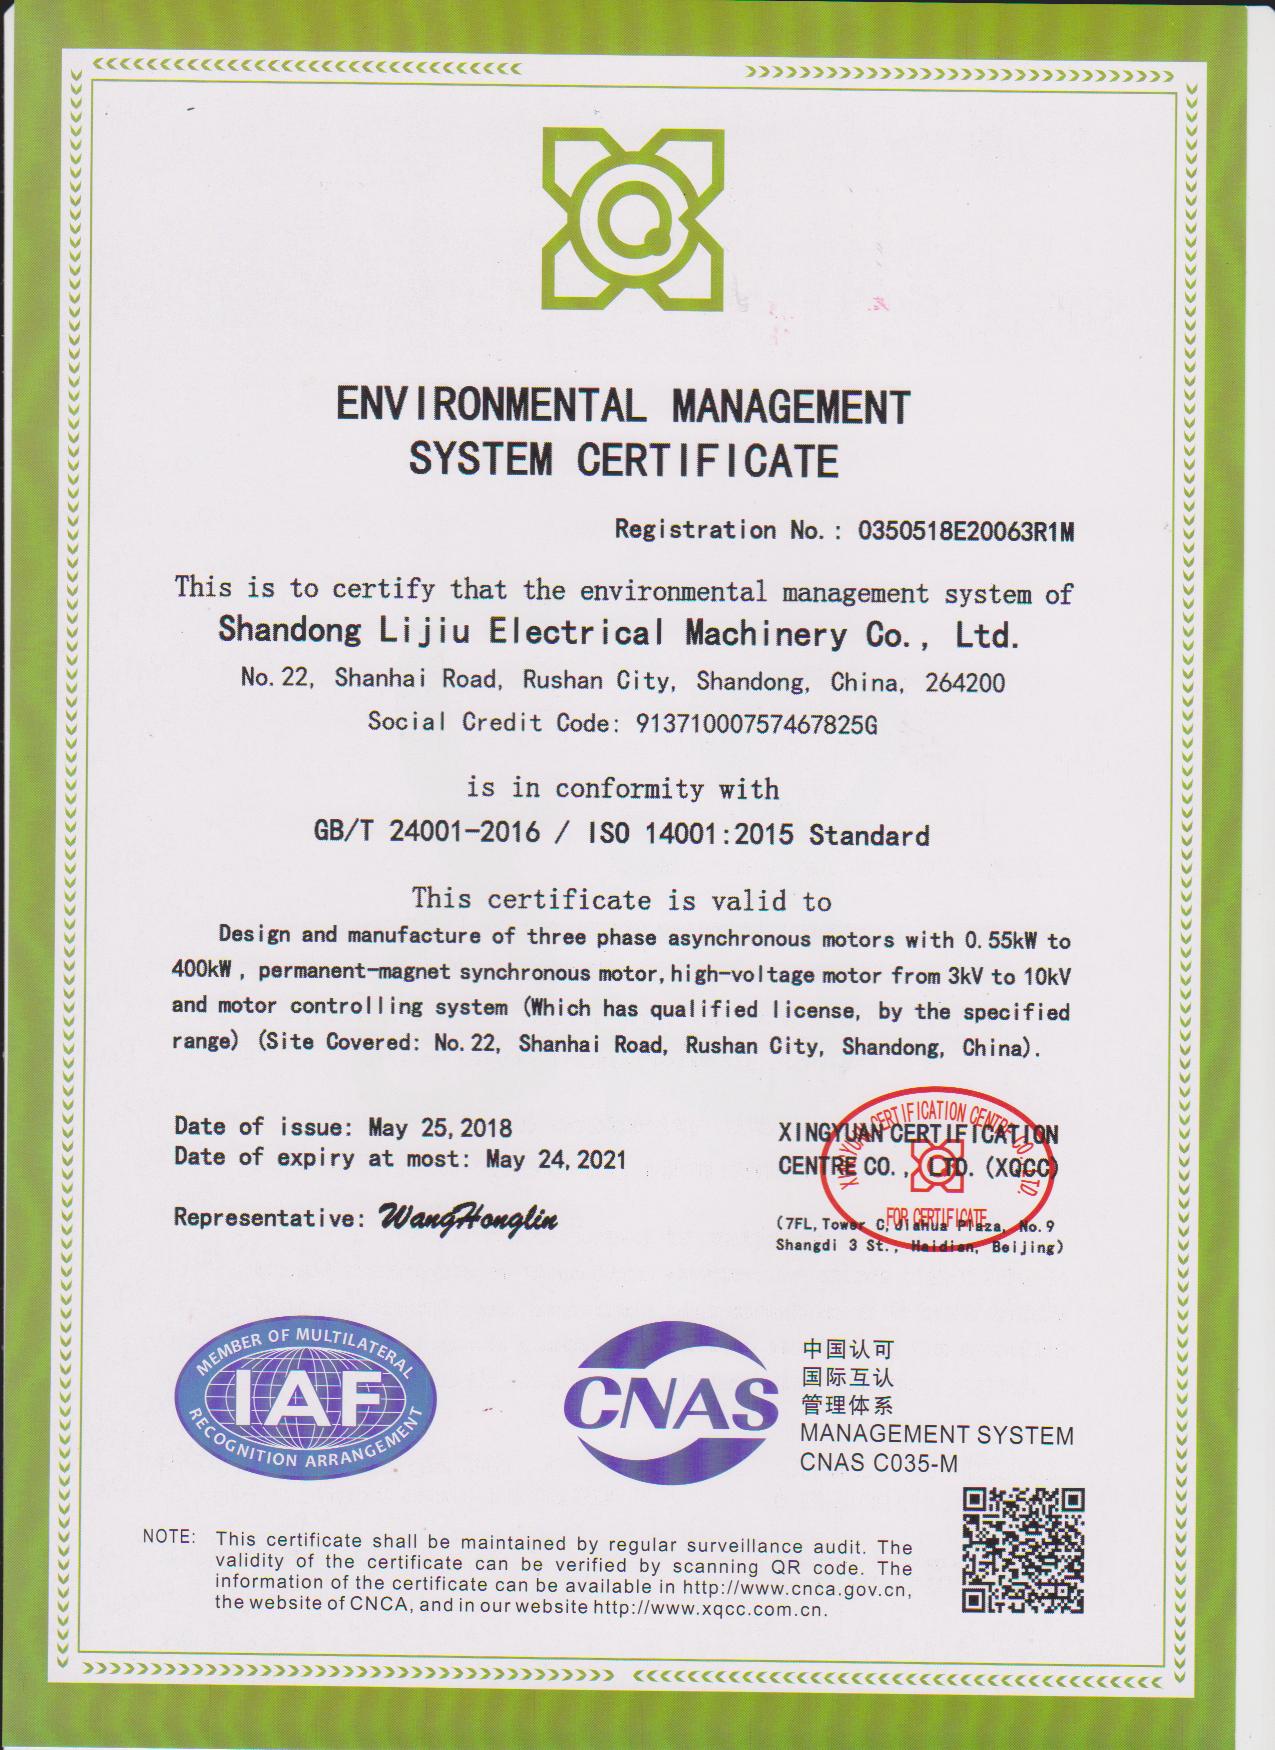  ISO 14001:2015